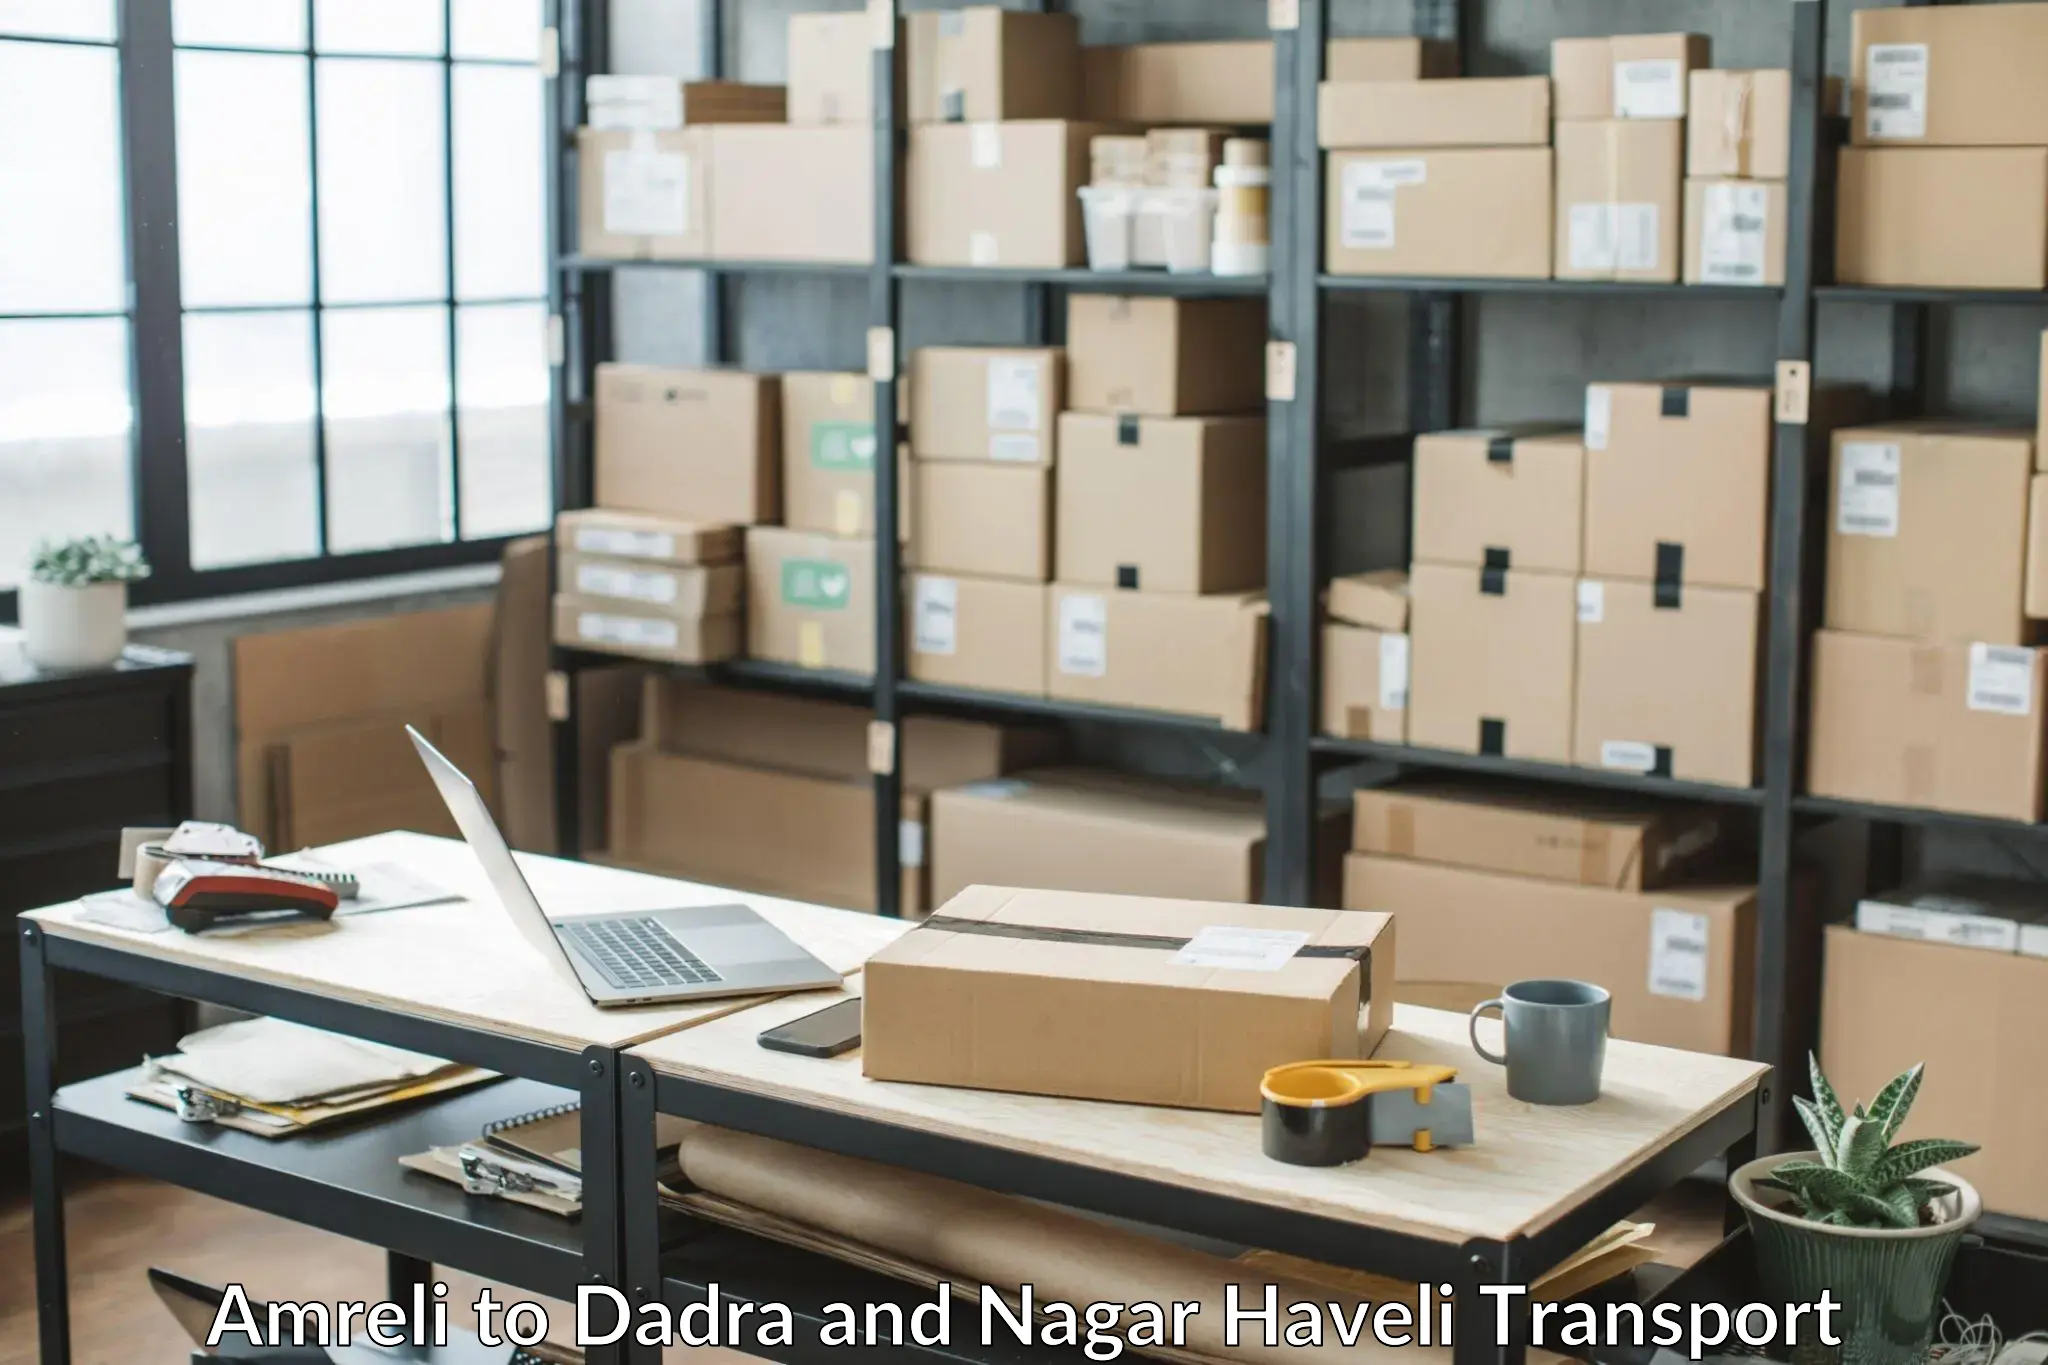 Luggage transport services in Amreli to Dadra and Nagar Haveli